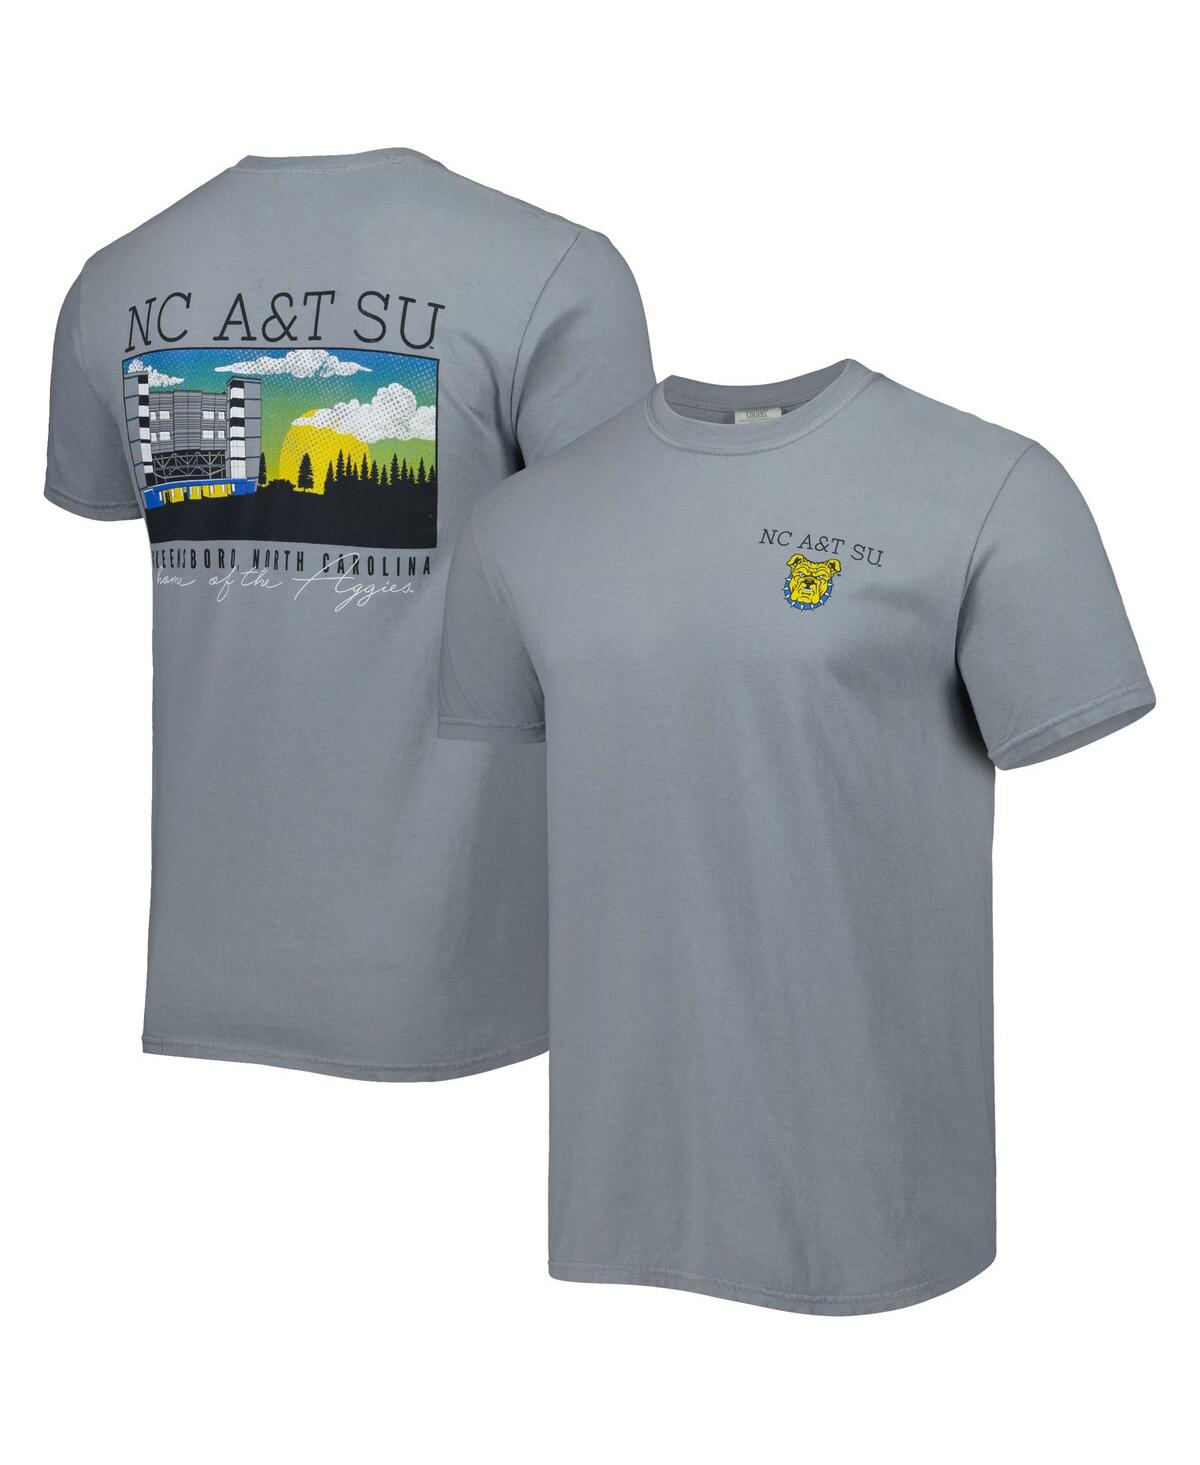 IMAGE ONE MEN'S GRAY NORTH CAROLINA A&T AGGIES CAMPUS SCENERY COMFORT COLOR T-SHIRT